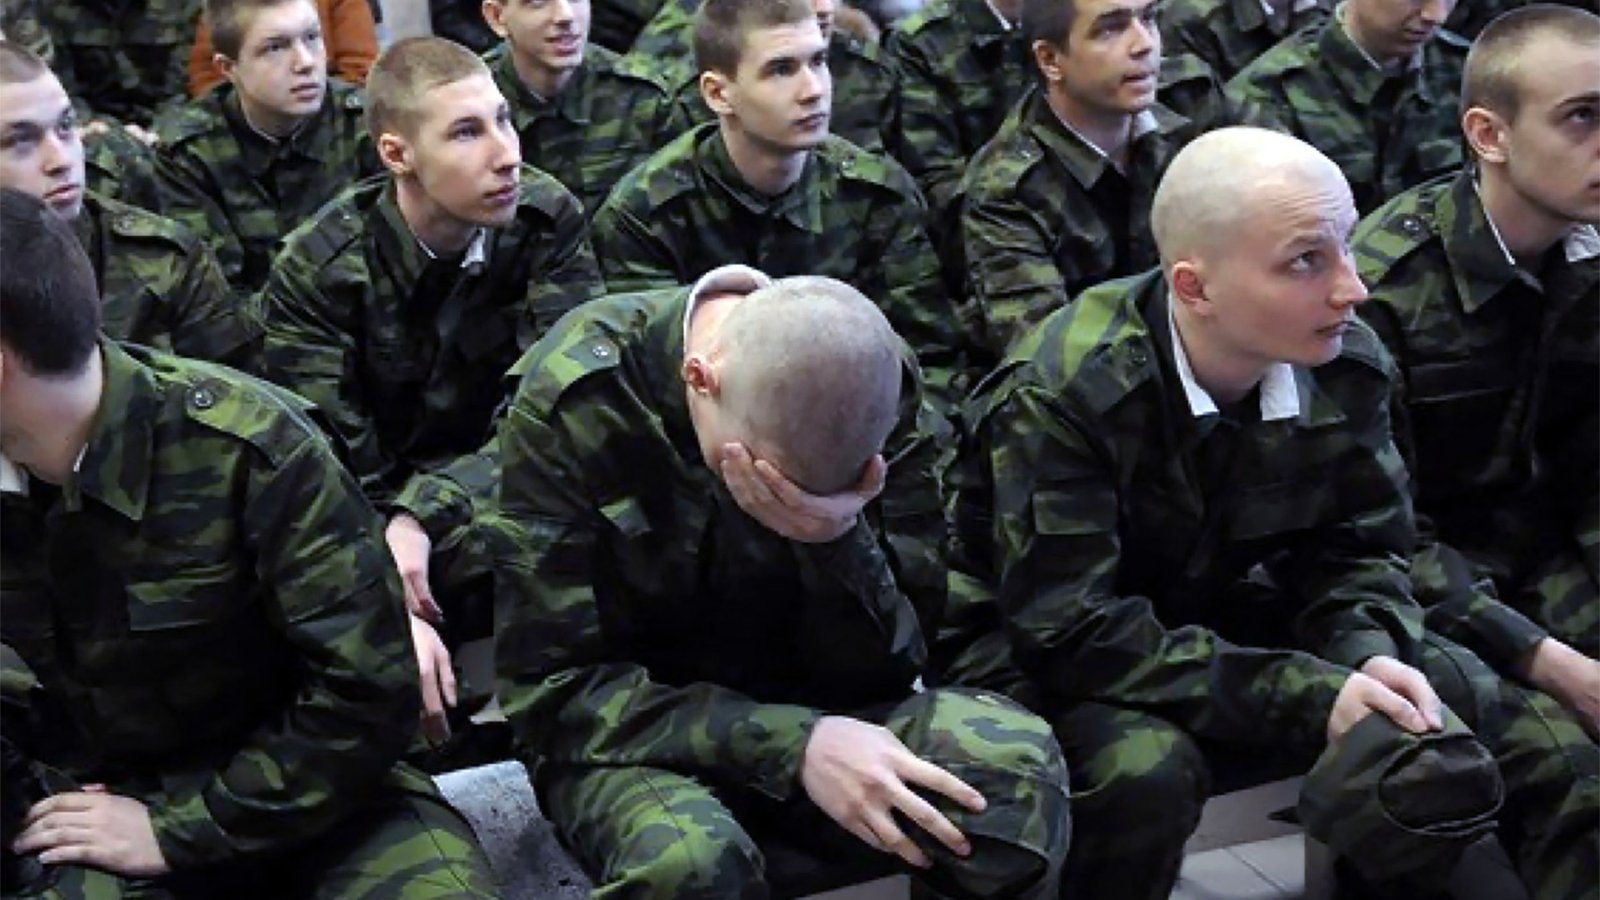 Putin ramps up forces with 150000 Russians called up in highest ever conscription drive amid fears of spring offensive